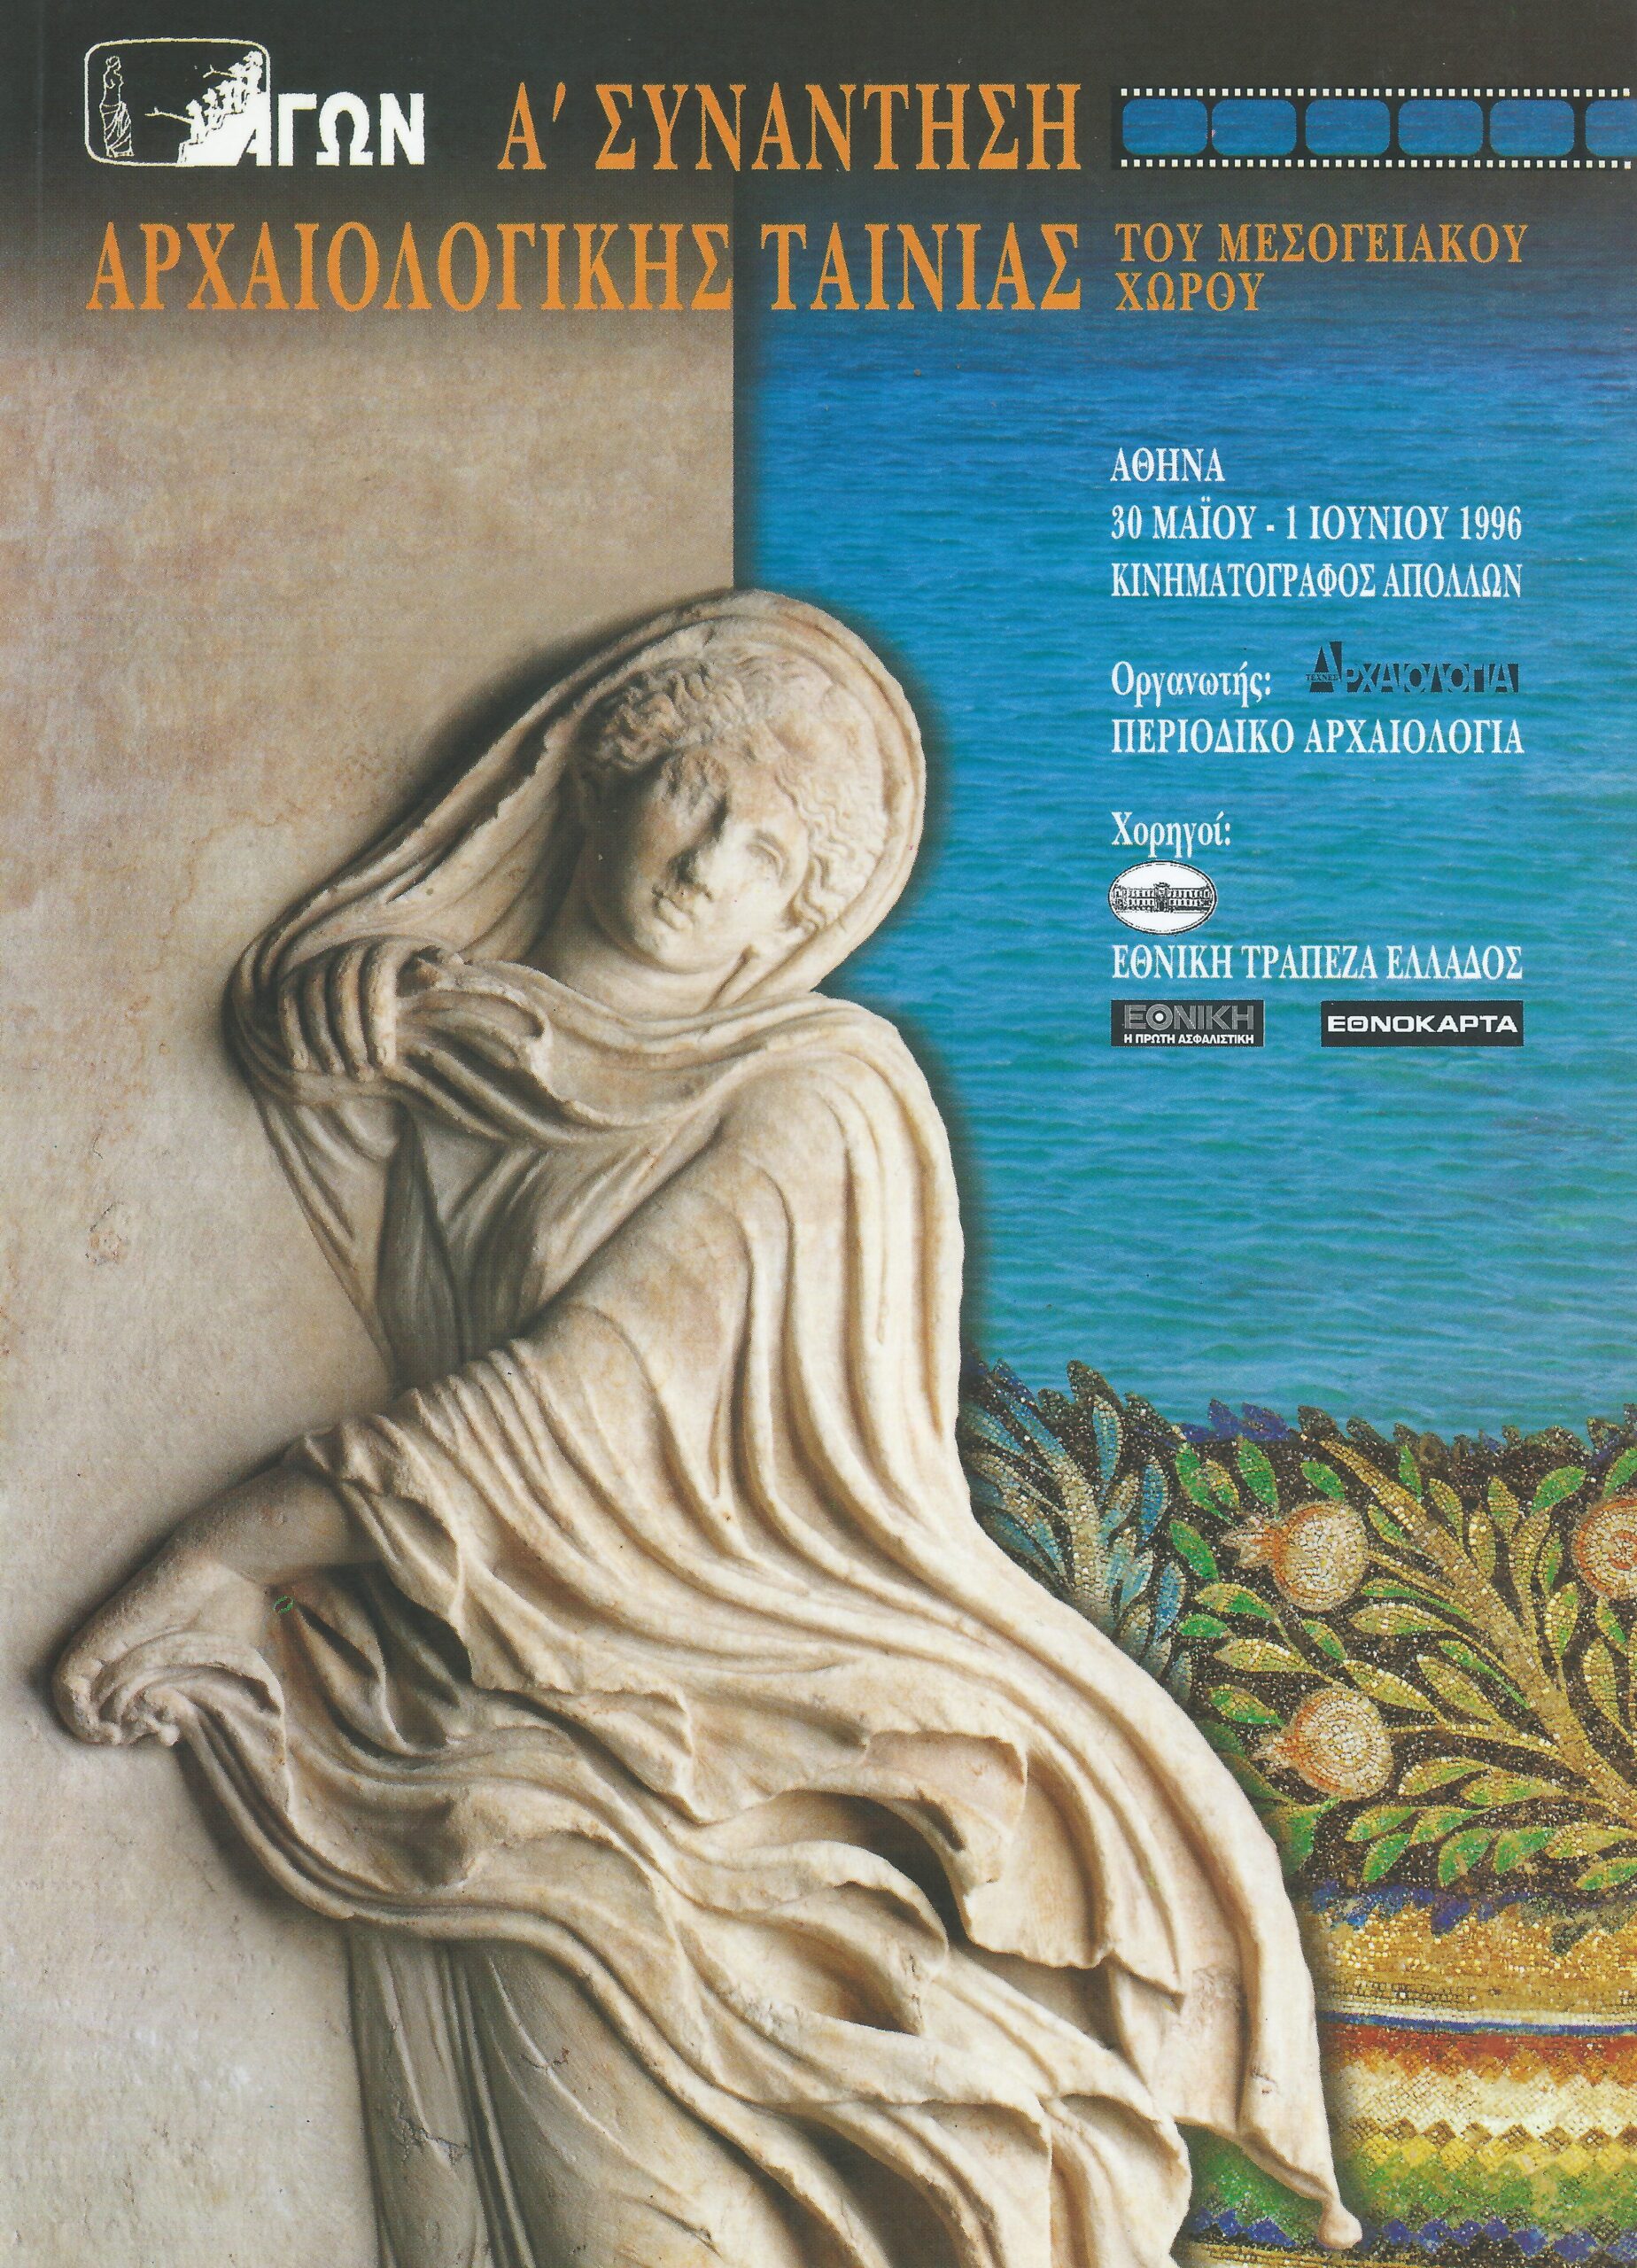 The Awards of the 1st AGON, International Meeting of Archaeological Film of the Mediterranean Area